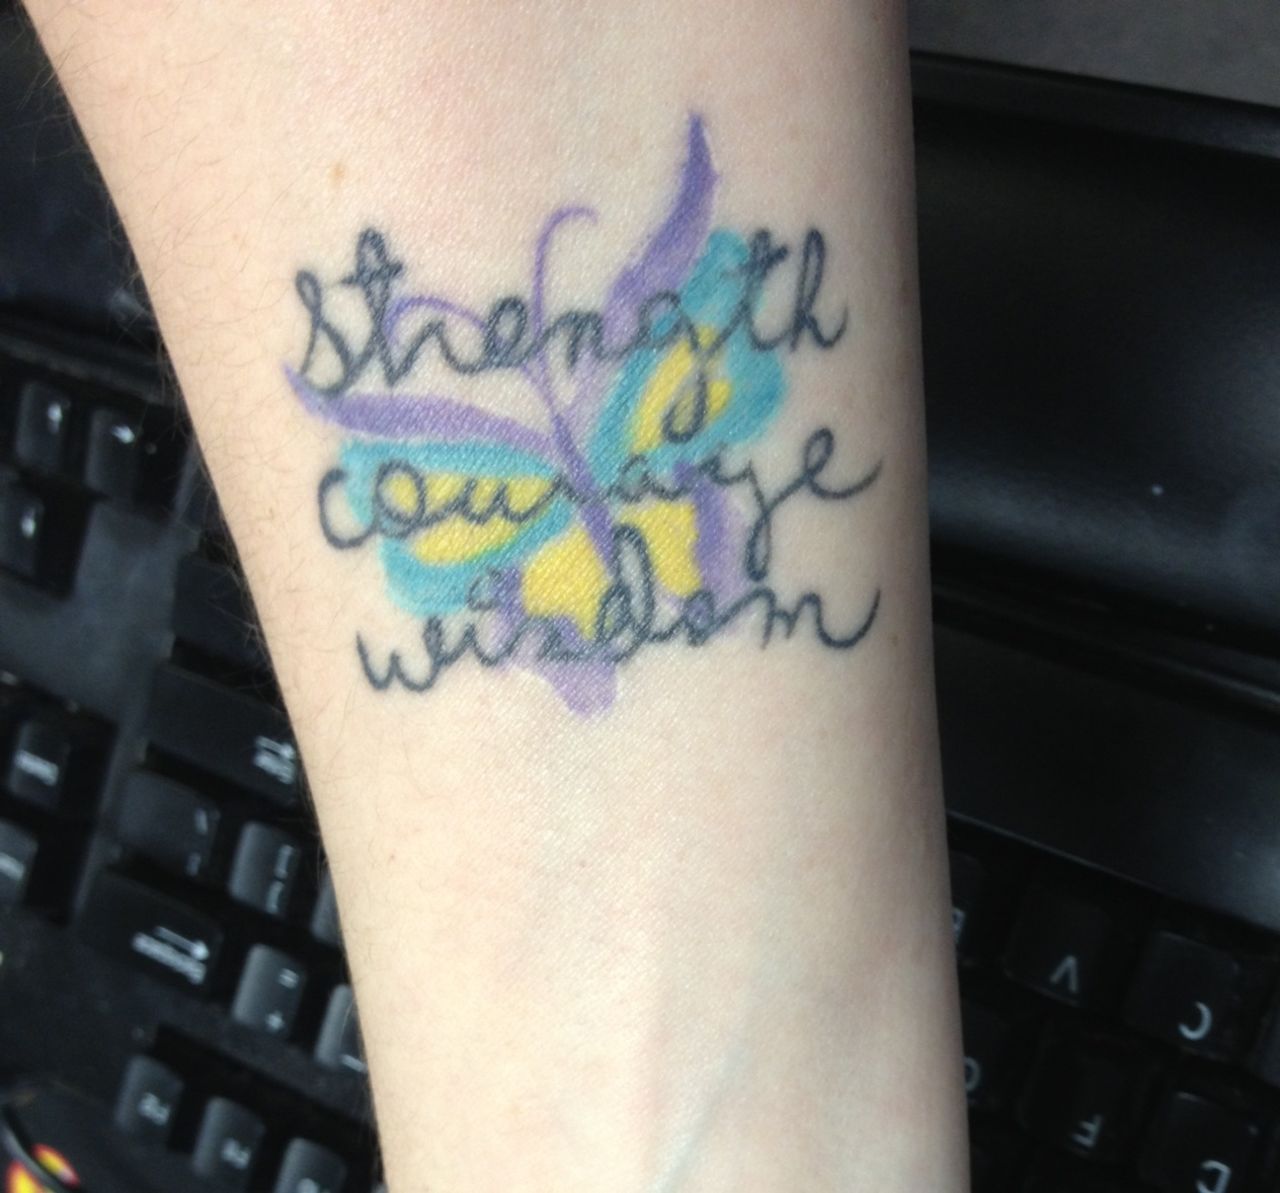 Judy Jordan asked her mother to write out the words <a href="http://ireport.cnn.com/docs/DOC-966180">"strength," "courage" and "wisdom"</a> so that she could have them tattooed on her arm in her mom's handwriting. The words come from the title of an India.Arie song. "Since my mom had to raise my brother and myself on her own, I felt that these words described her perfectly," said Jordan. "I can see it constantly and when I get bogged down thinking how hard being a single parent is, I see my tattoo and realize that I am my mother's daughter, so I'm bound to have some of her strength, courage, and wisdom." 